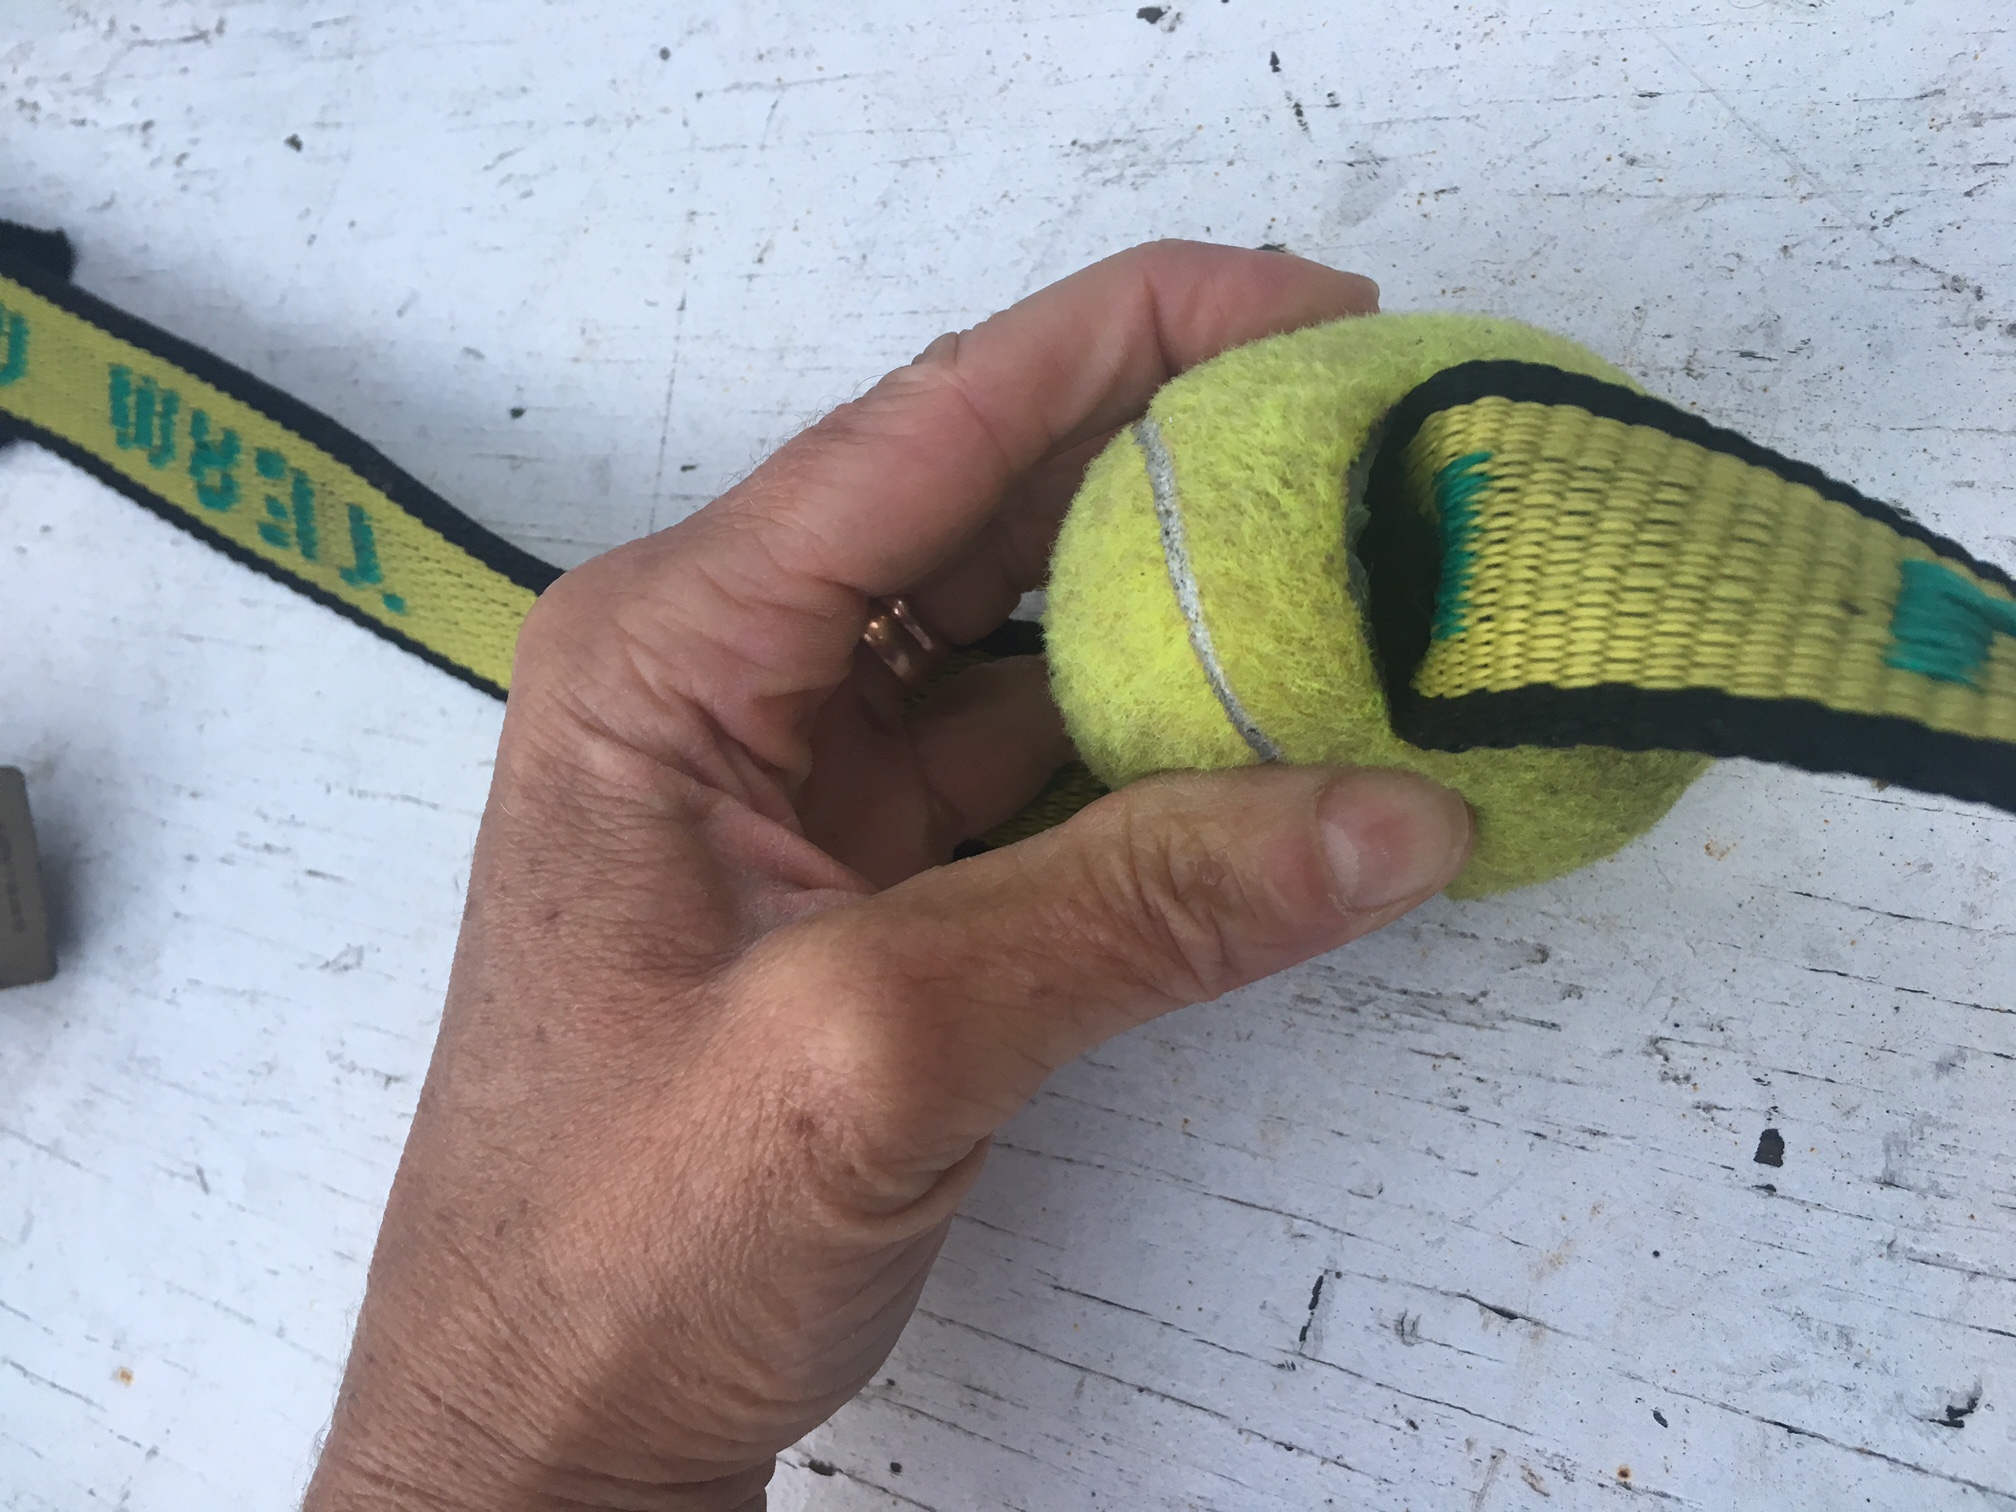 Tennis ball sliced for boat tie